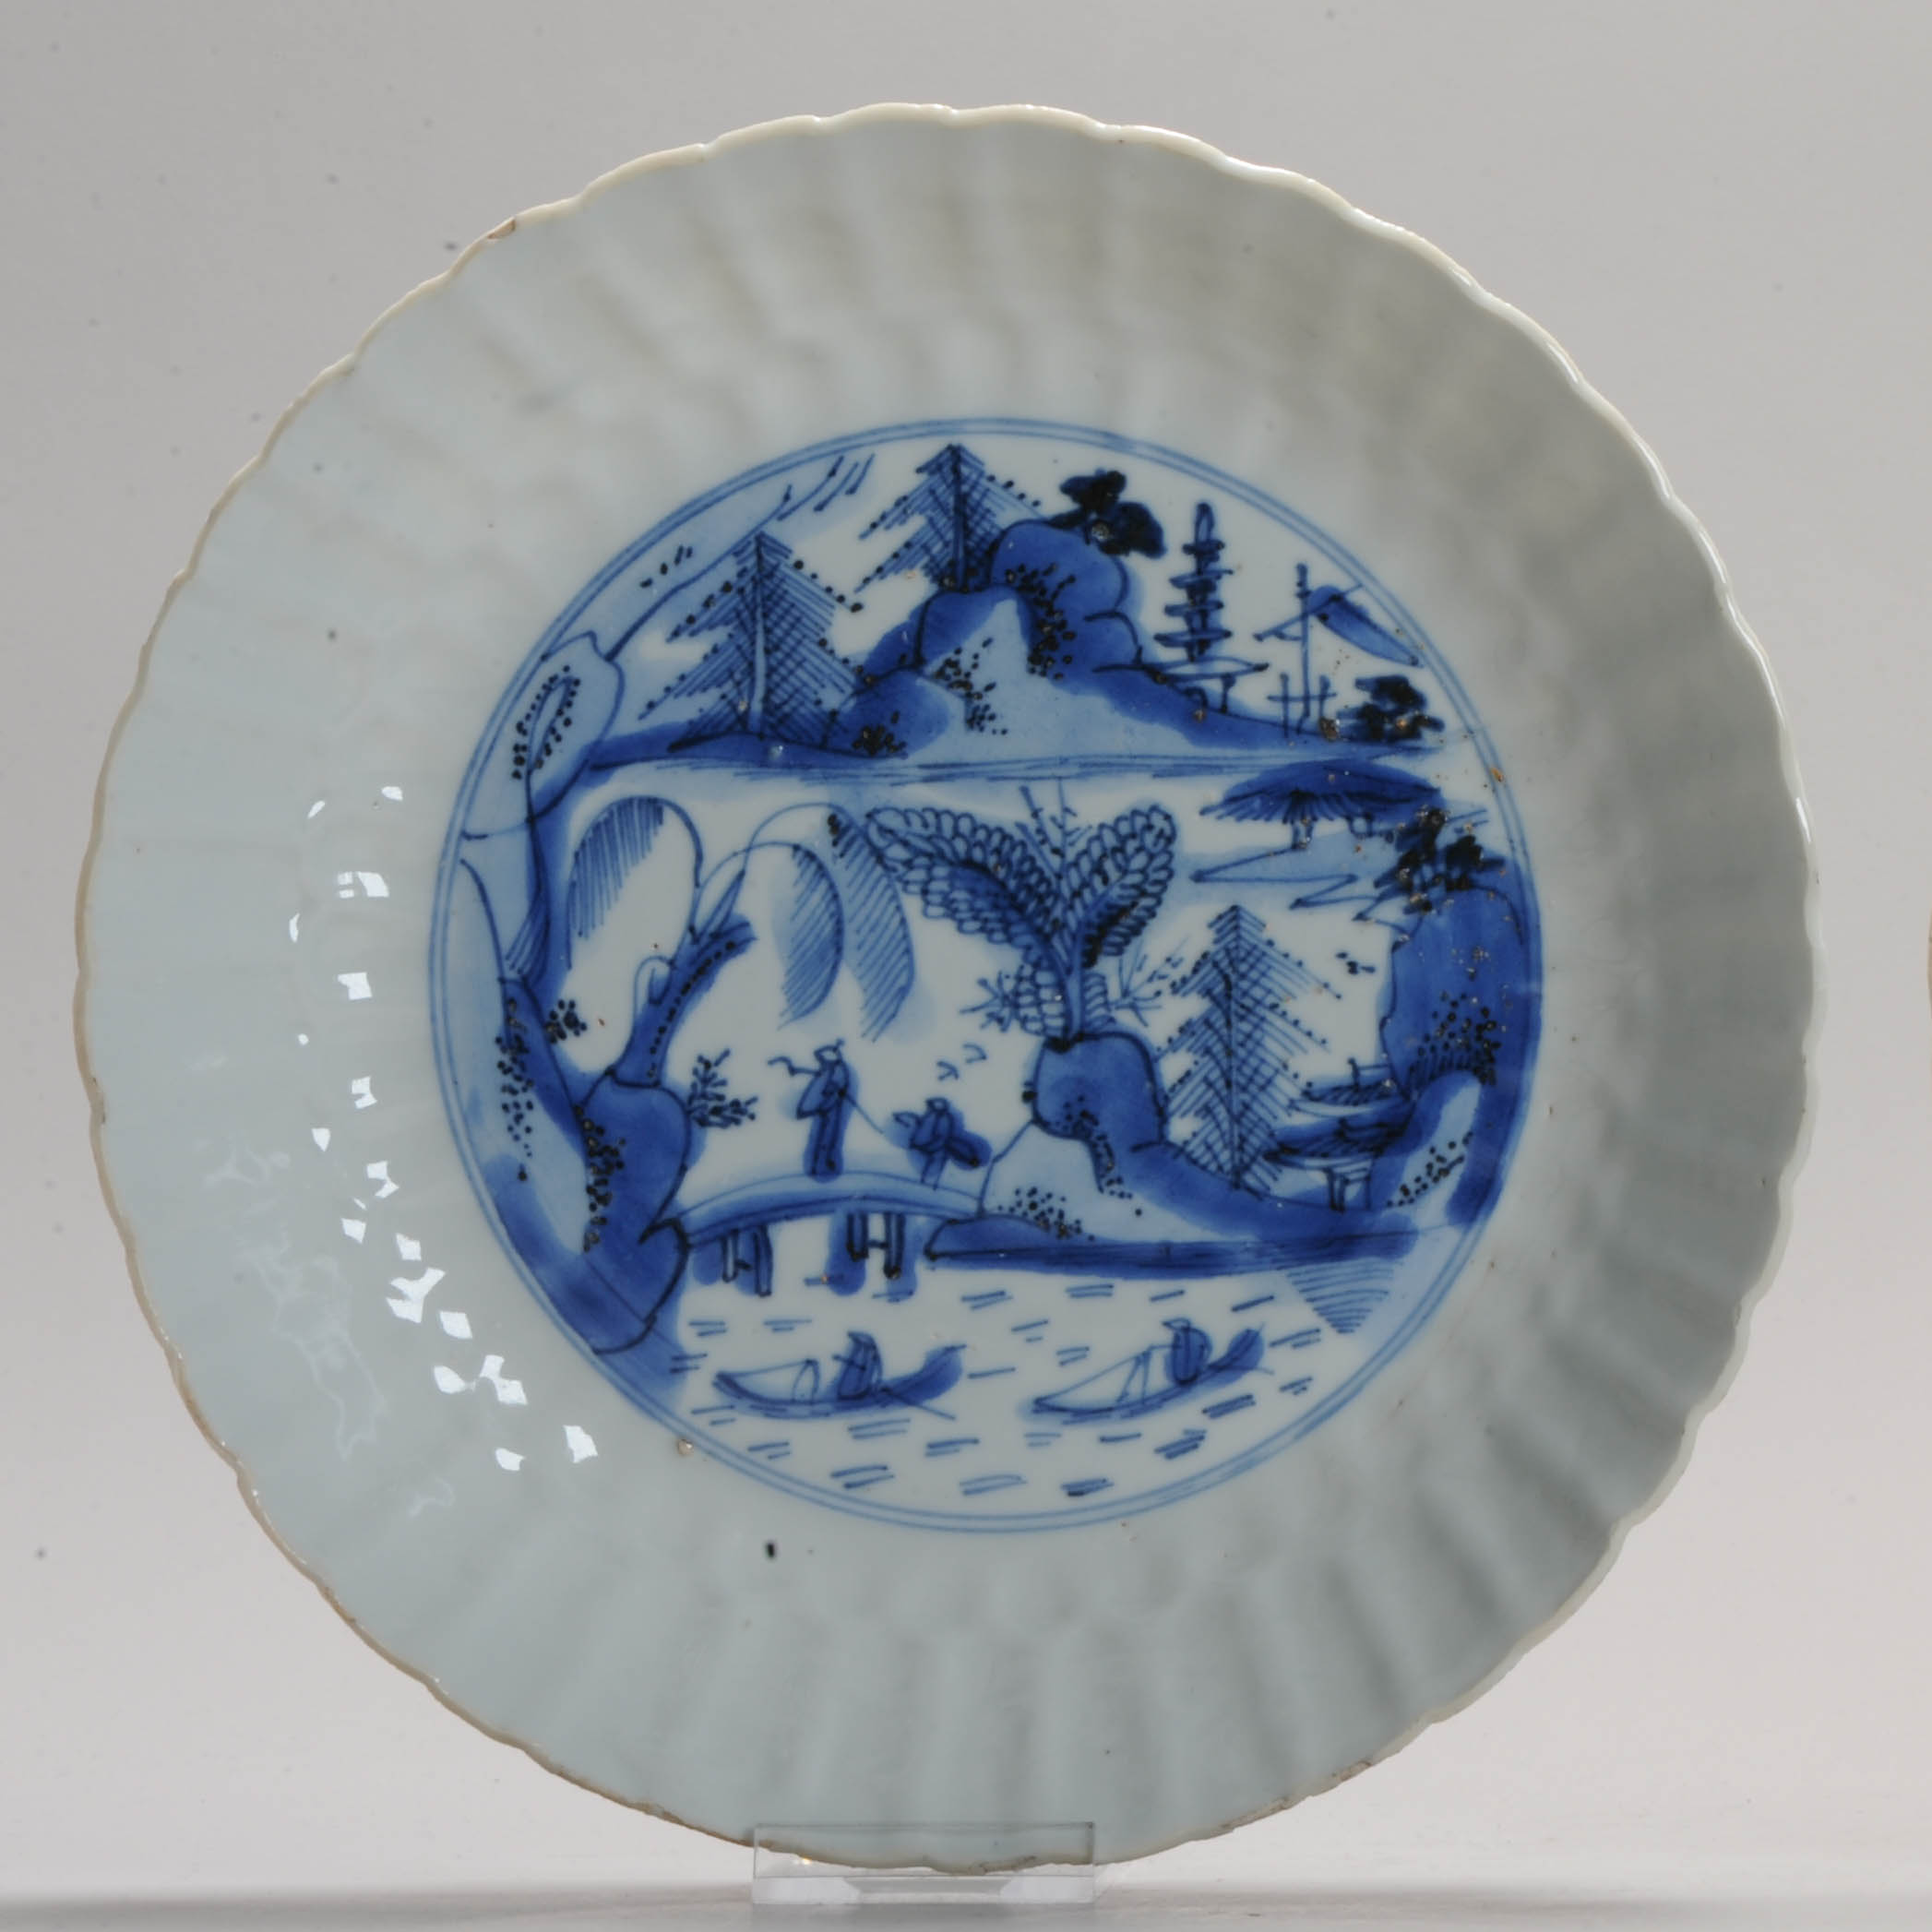 Antique Ming Chinese Porcelain 16/17th c Blue and White dish with Landscape